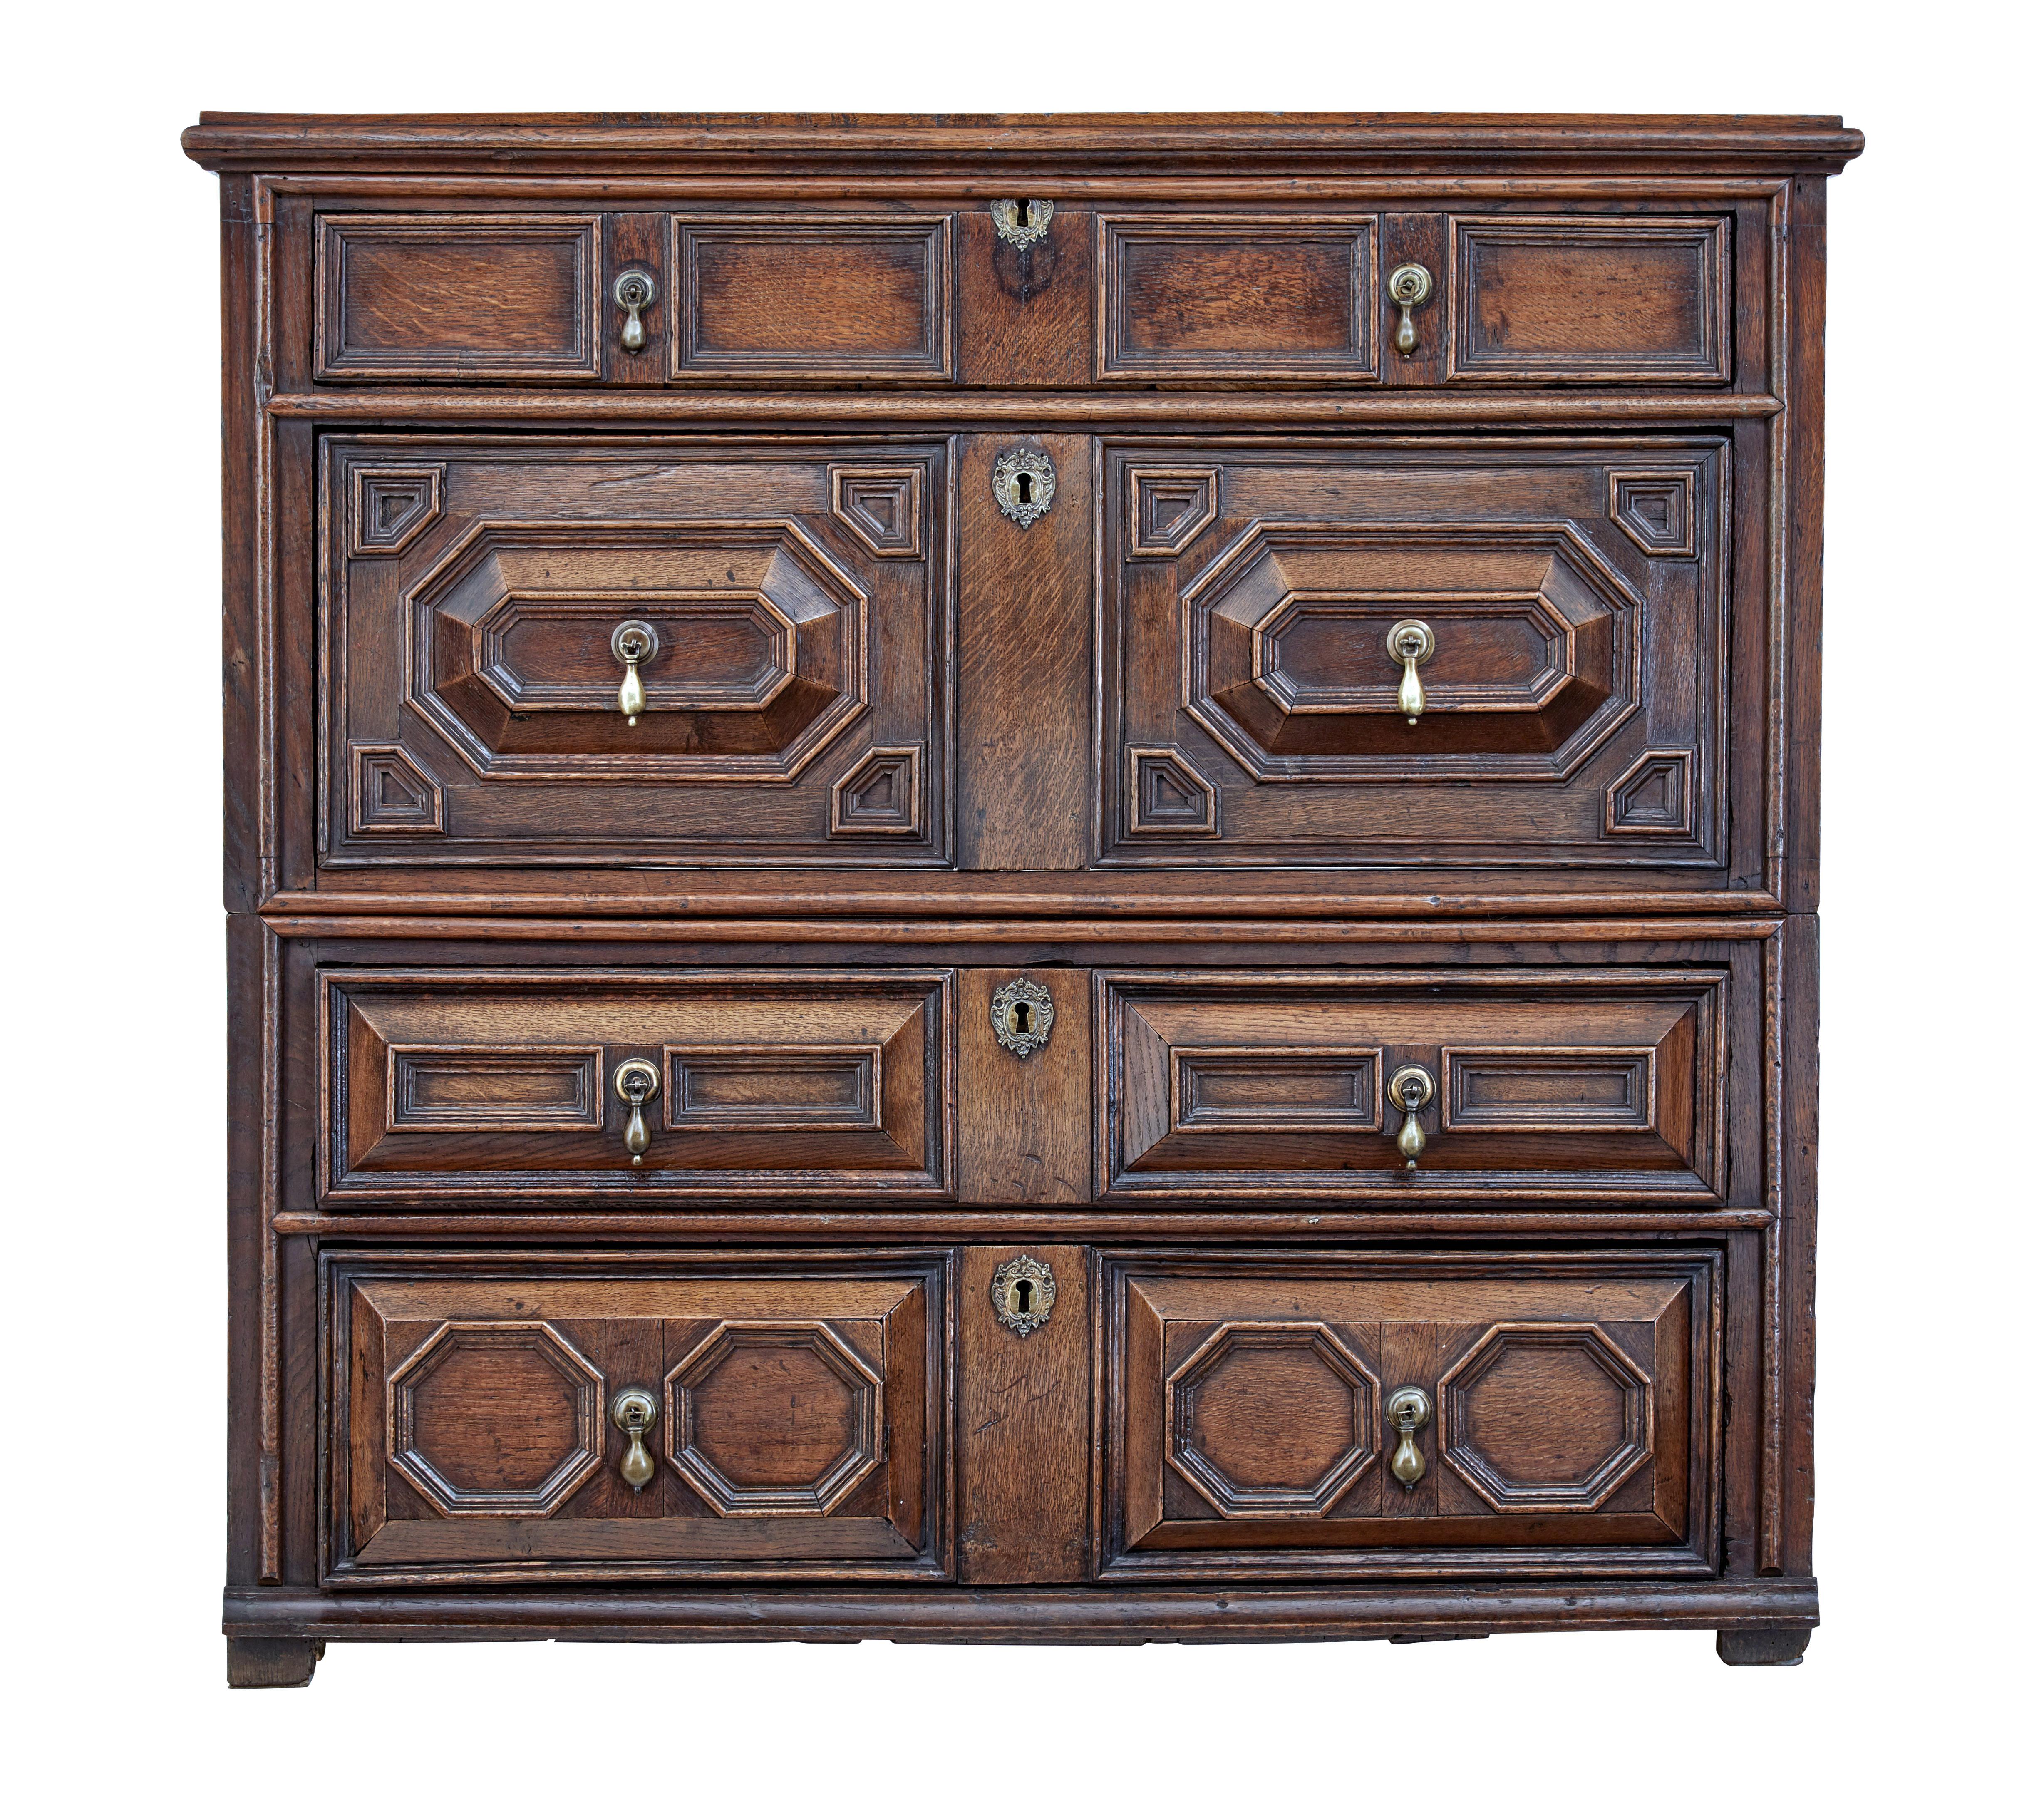 Late 17th century geometric split chest of drawers, circa 1690.

Here we have a late 17th century chest of drawers which has had the top drawer and lid converted to a shallow coffer, the remaining drawers function as normal.

Typical geometric